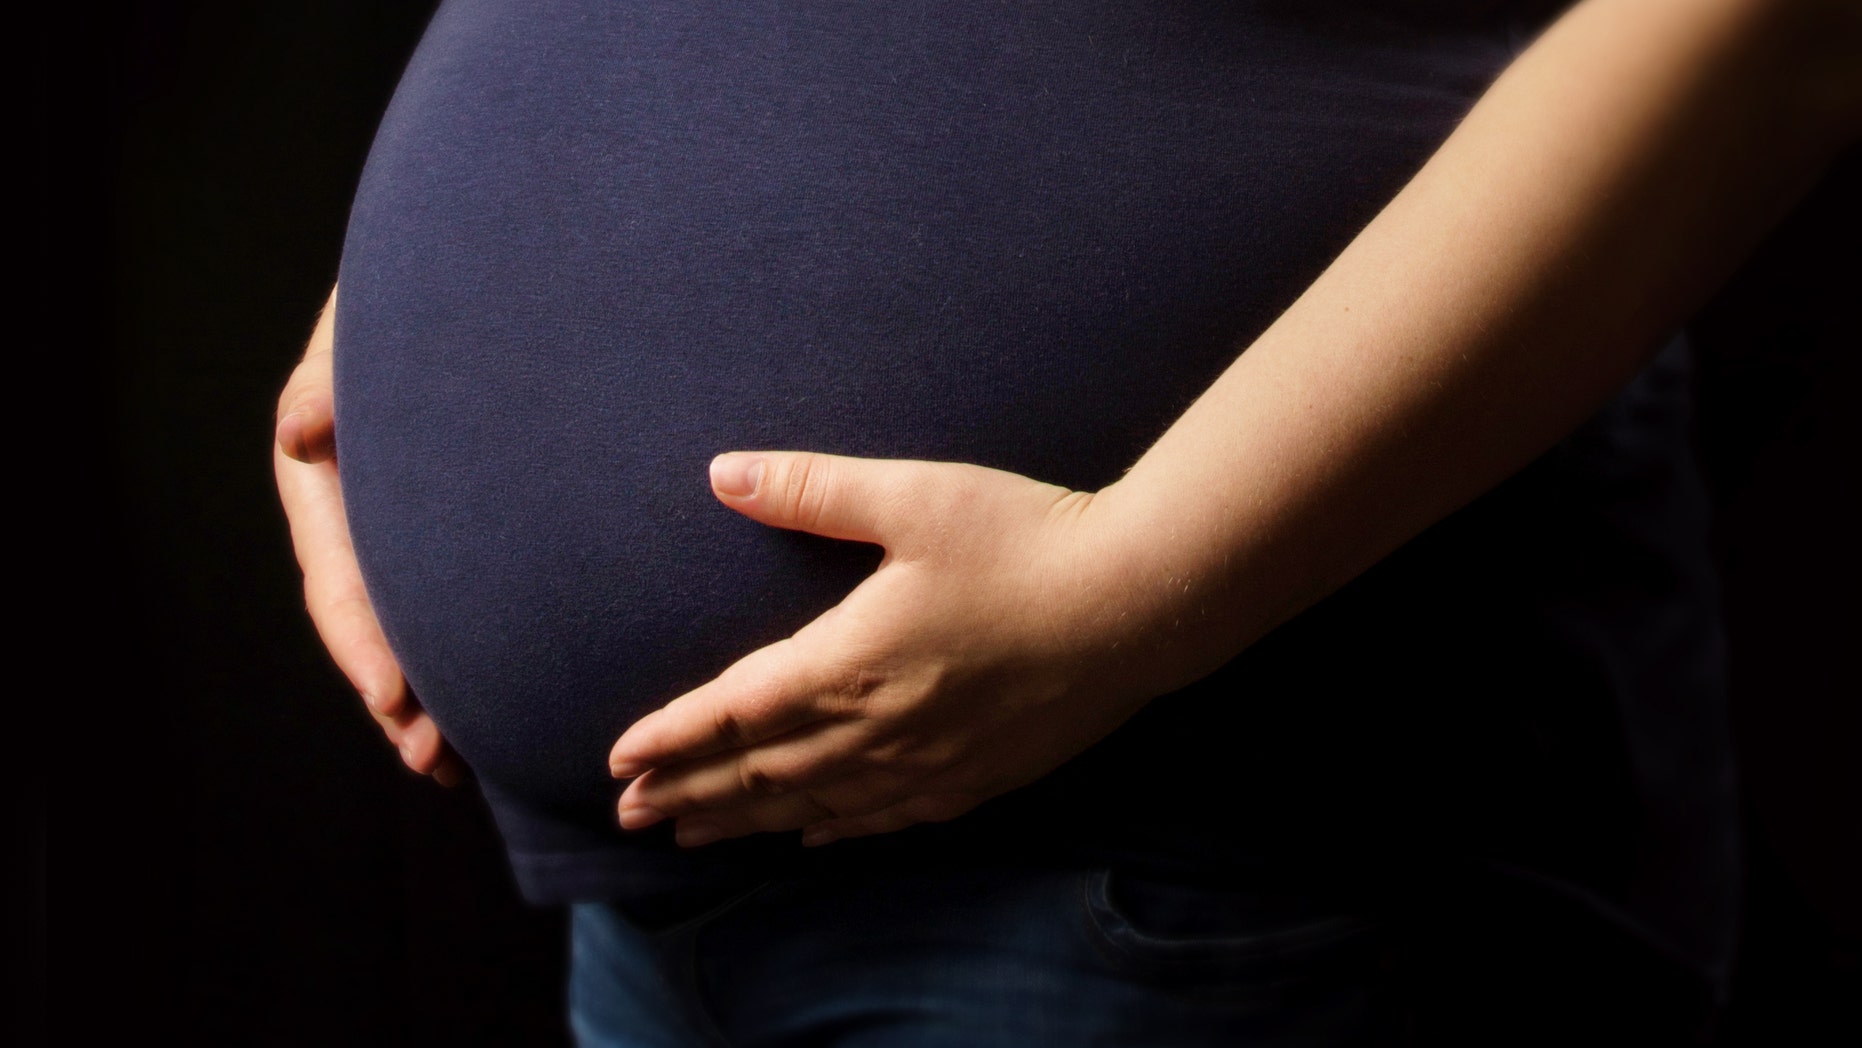 Excess Pregnancy Weight Gain Tied To Risk For Delivery Complications 